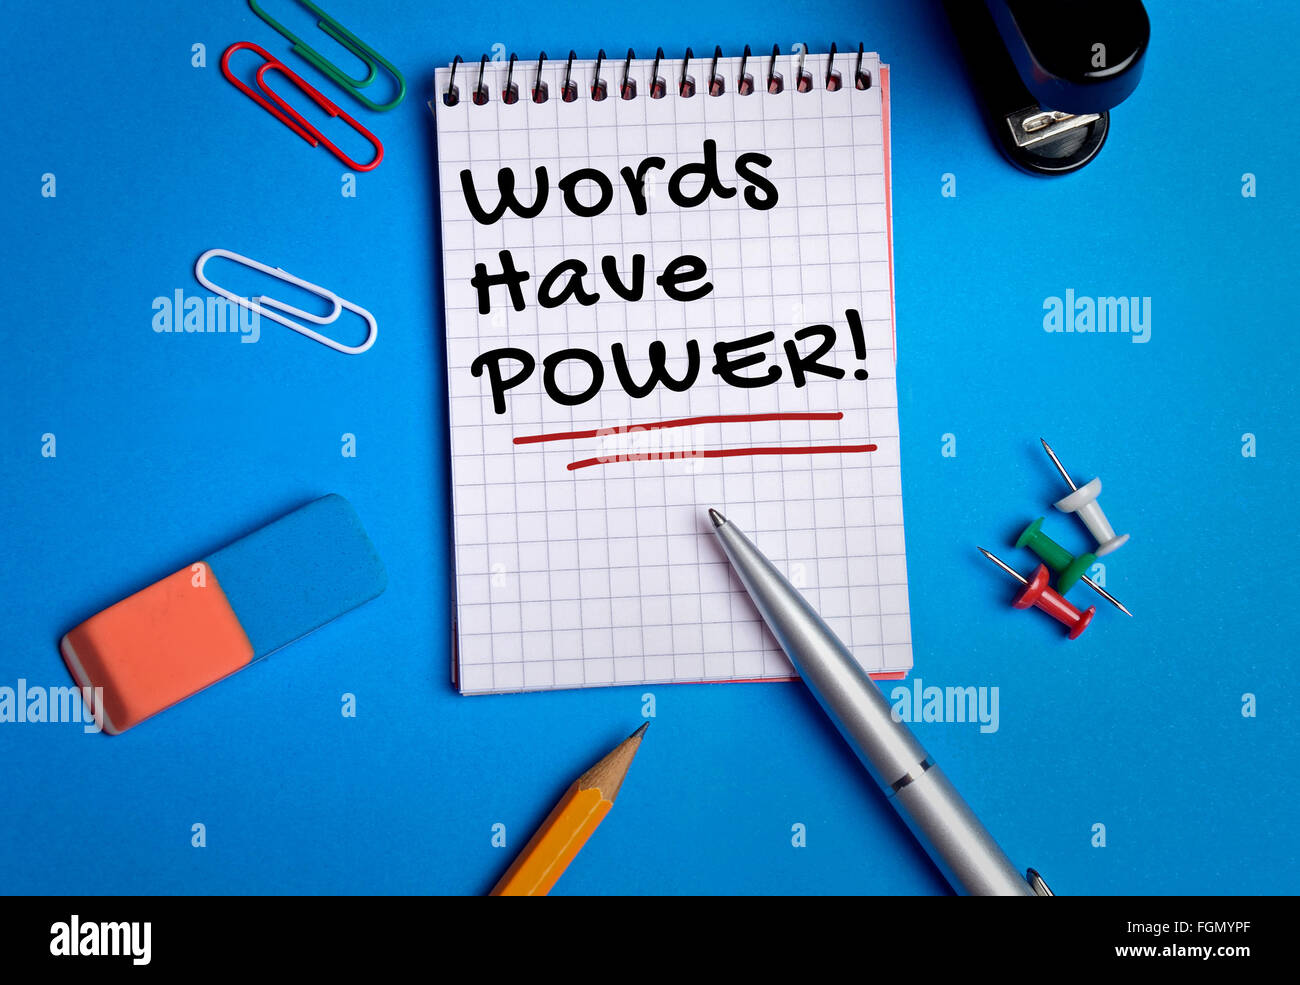 Words have power word on notebook page Stock Photo